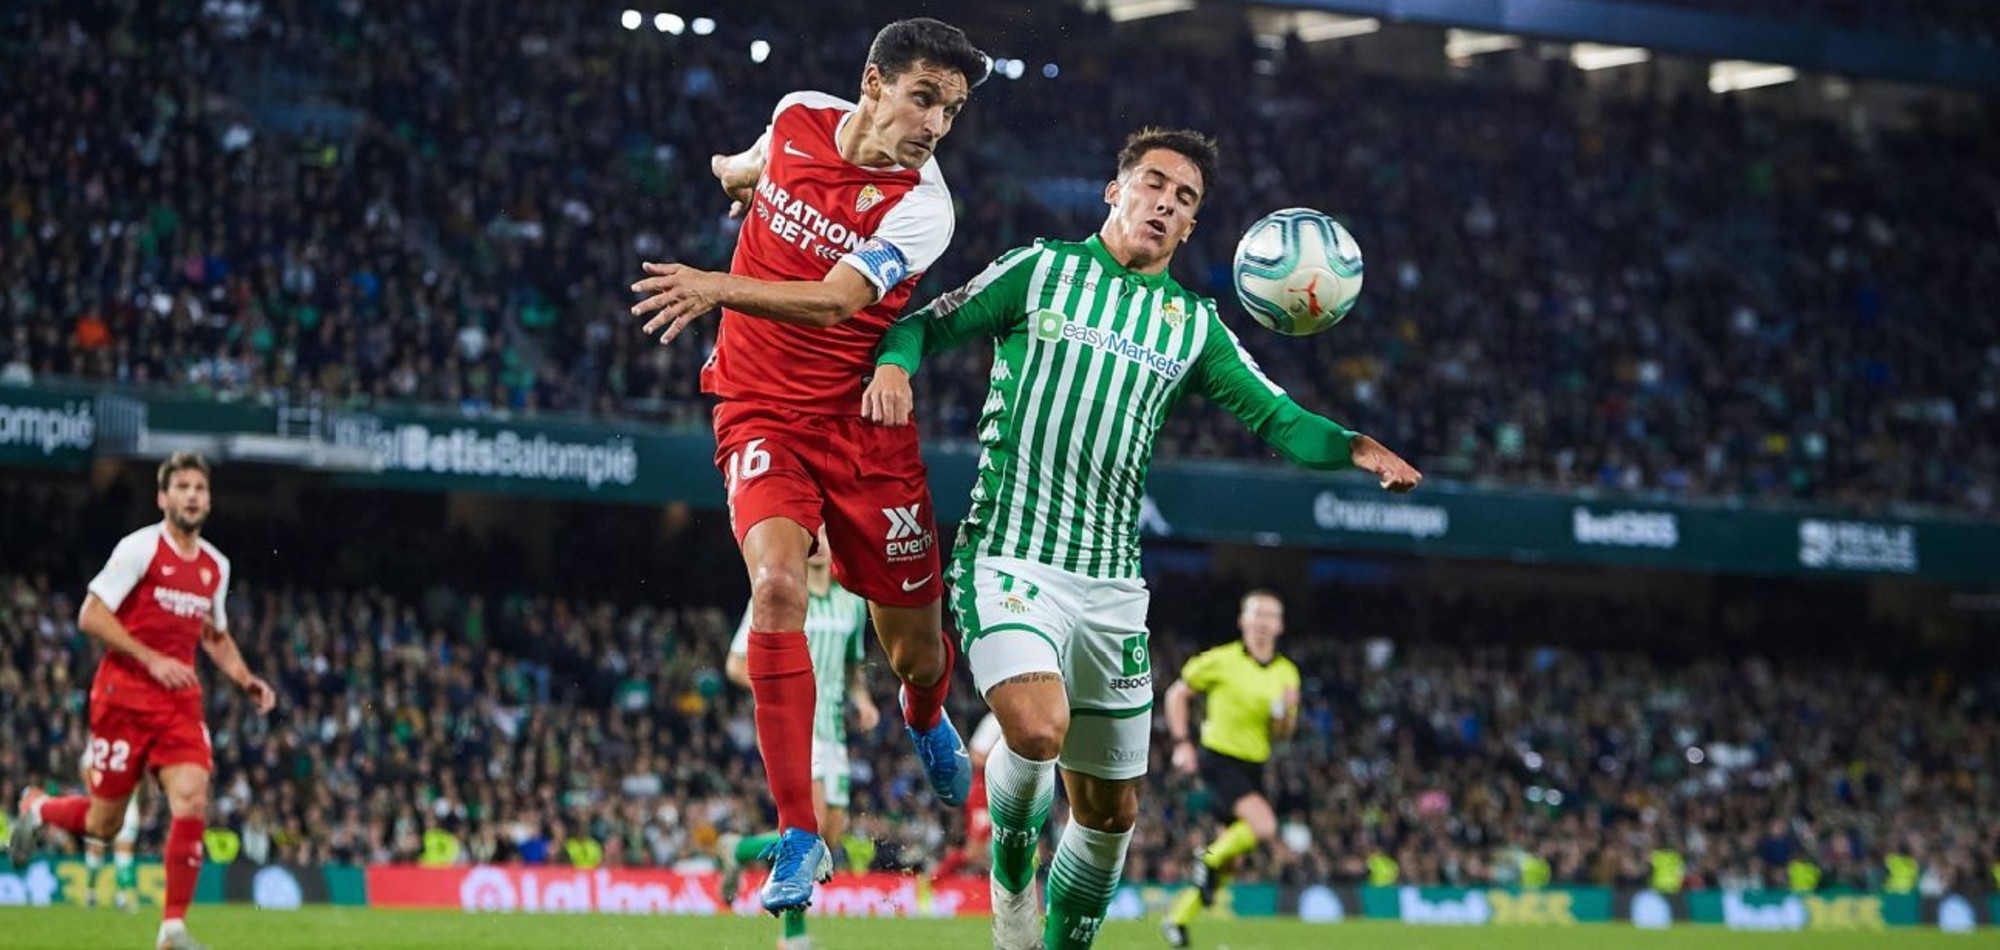 La Liga could resume with Betis-Sevilla behind closed doors derby on 11 June